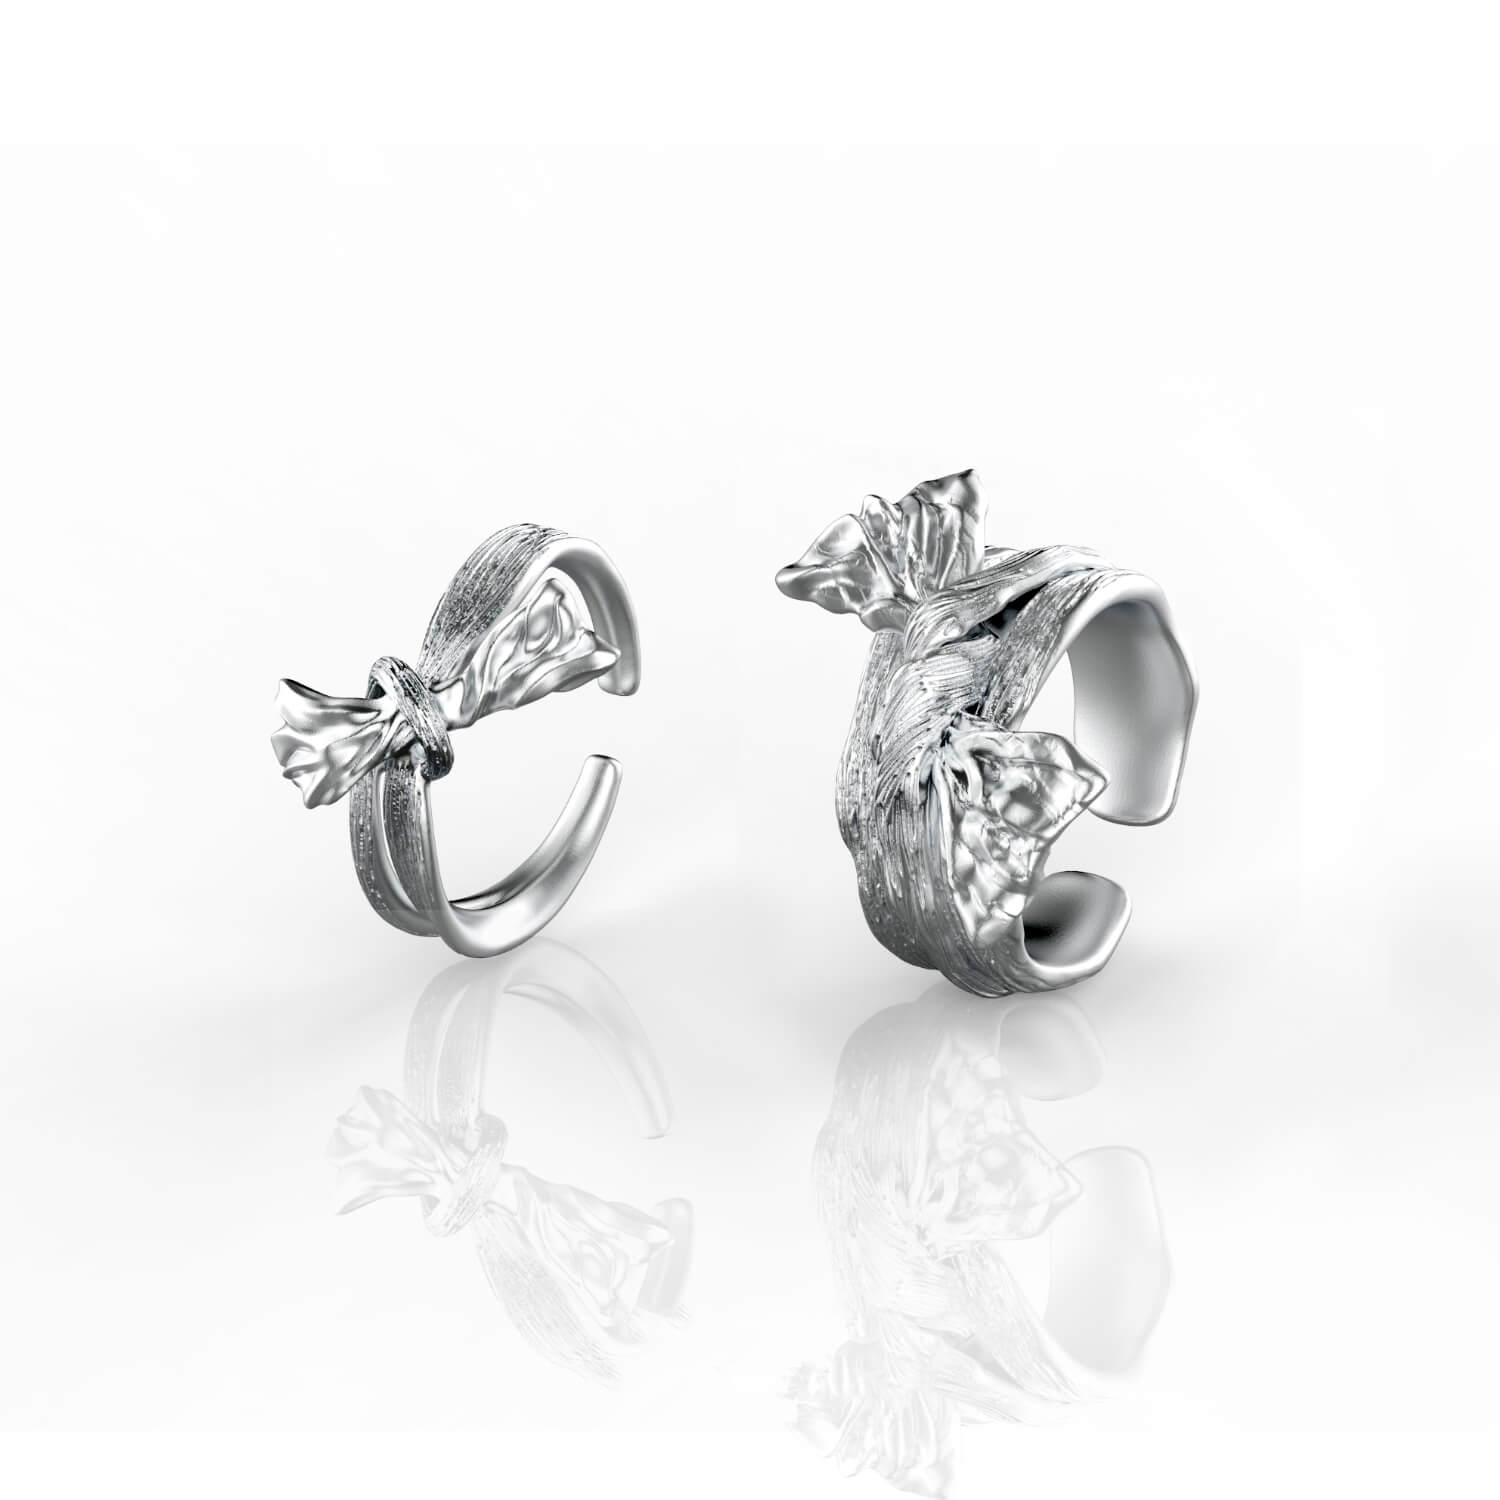 Beautiful love Bow Ring Sterling Silver  Buy at Khanie